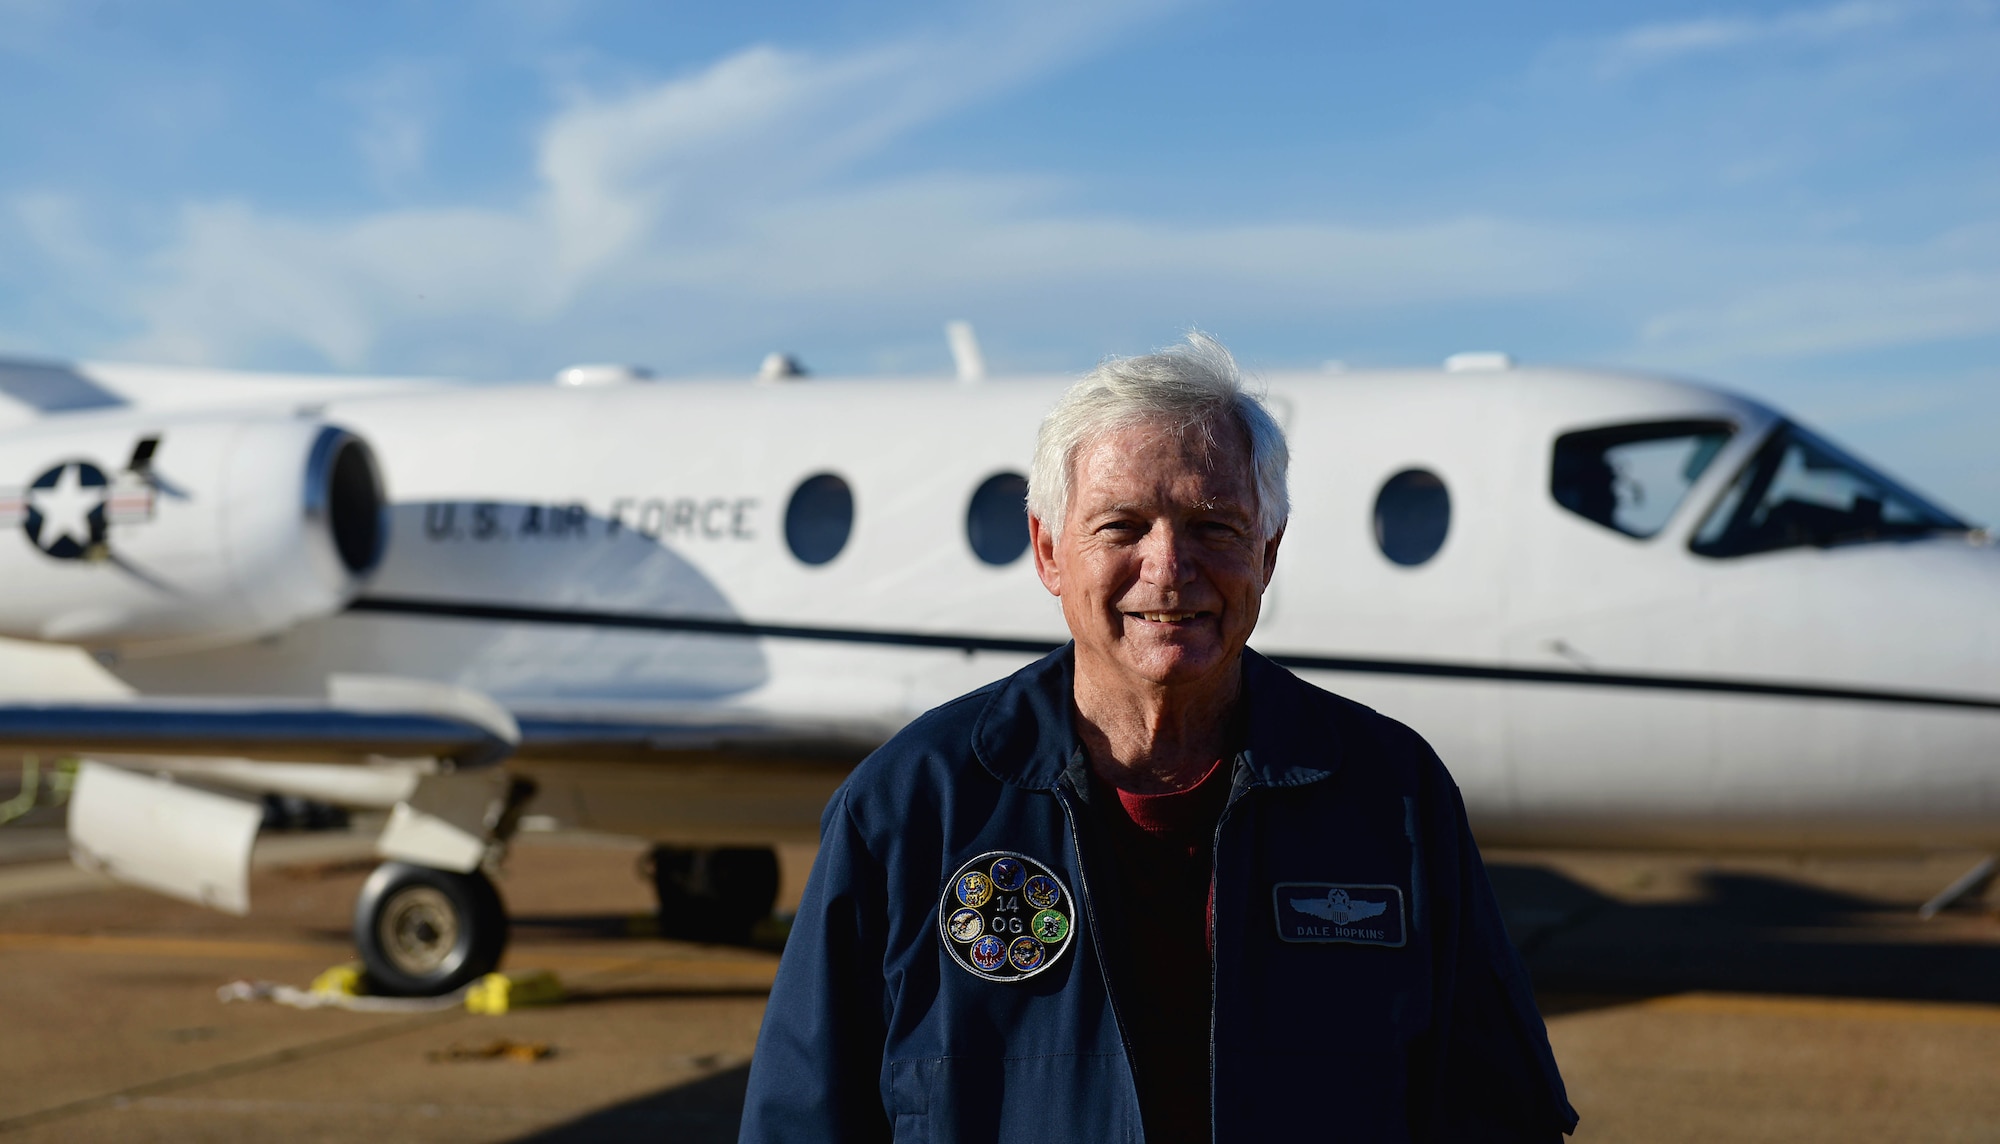 Dale Hopkins, T-1A Jayhawk simulation instructor pilot, stands in front of a T-1A Oct. 17, 2017, on Columbus Air Force Base, Mississippi. Since he retired as a colonel in 1989, he has continued his service to the Air Force as a sim instructor, his passion for aviation helping him teach the newest Air Force pilots. (U.S. Air Force photo by Airman 1st Class Keith Holcomb)